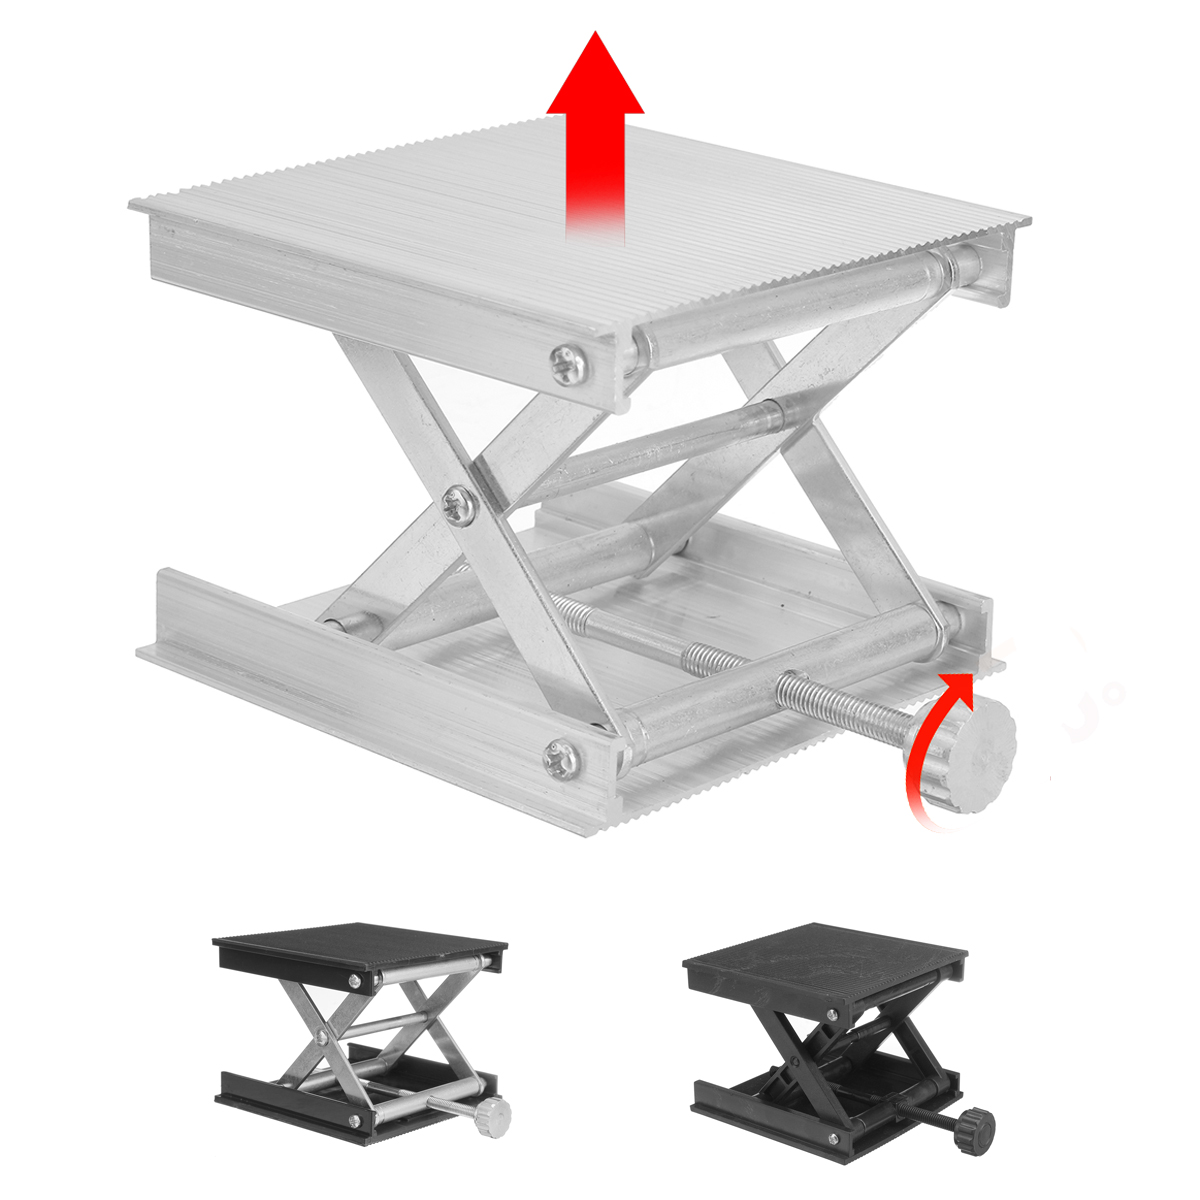 25-65-99cm-Aluminum-Router-Table-Woodworking-Engraving-Lab-Lifting-Stand-Rack-Platform-Benches-1861024-5